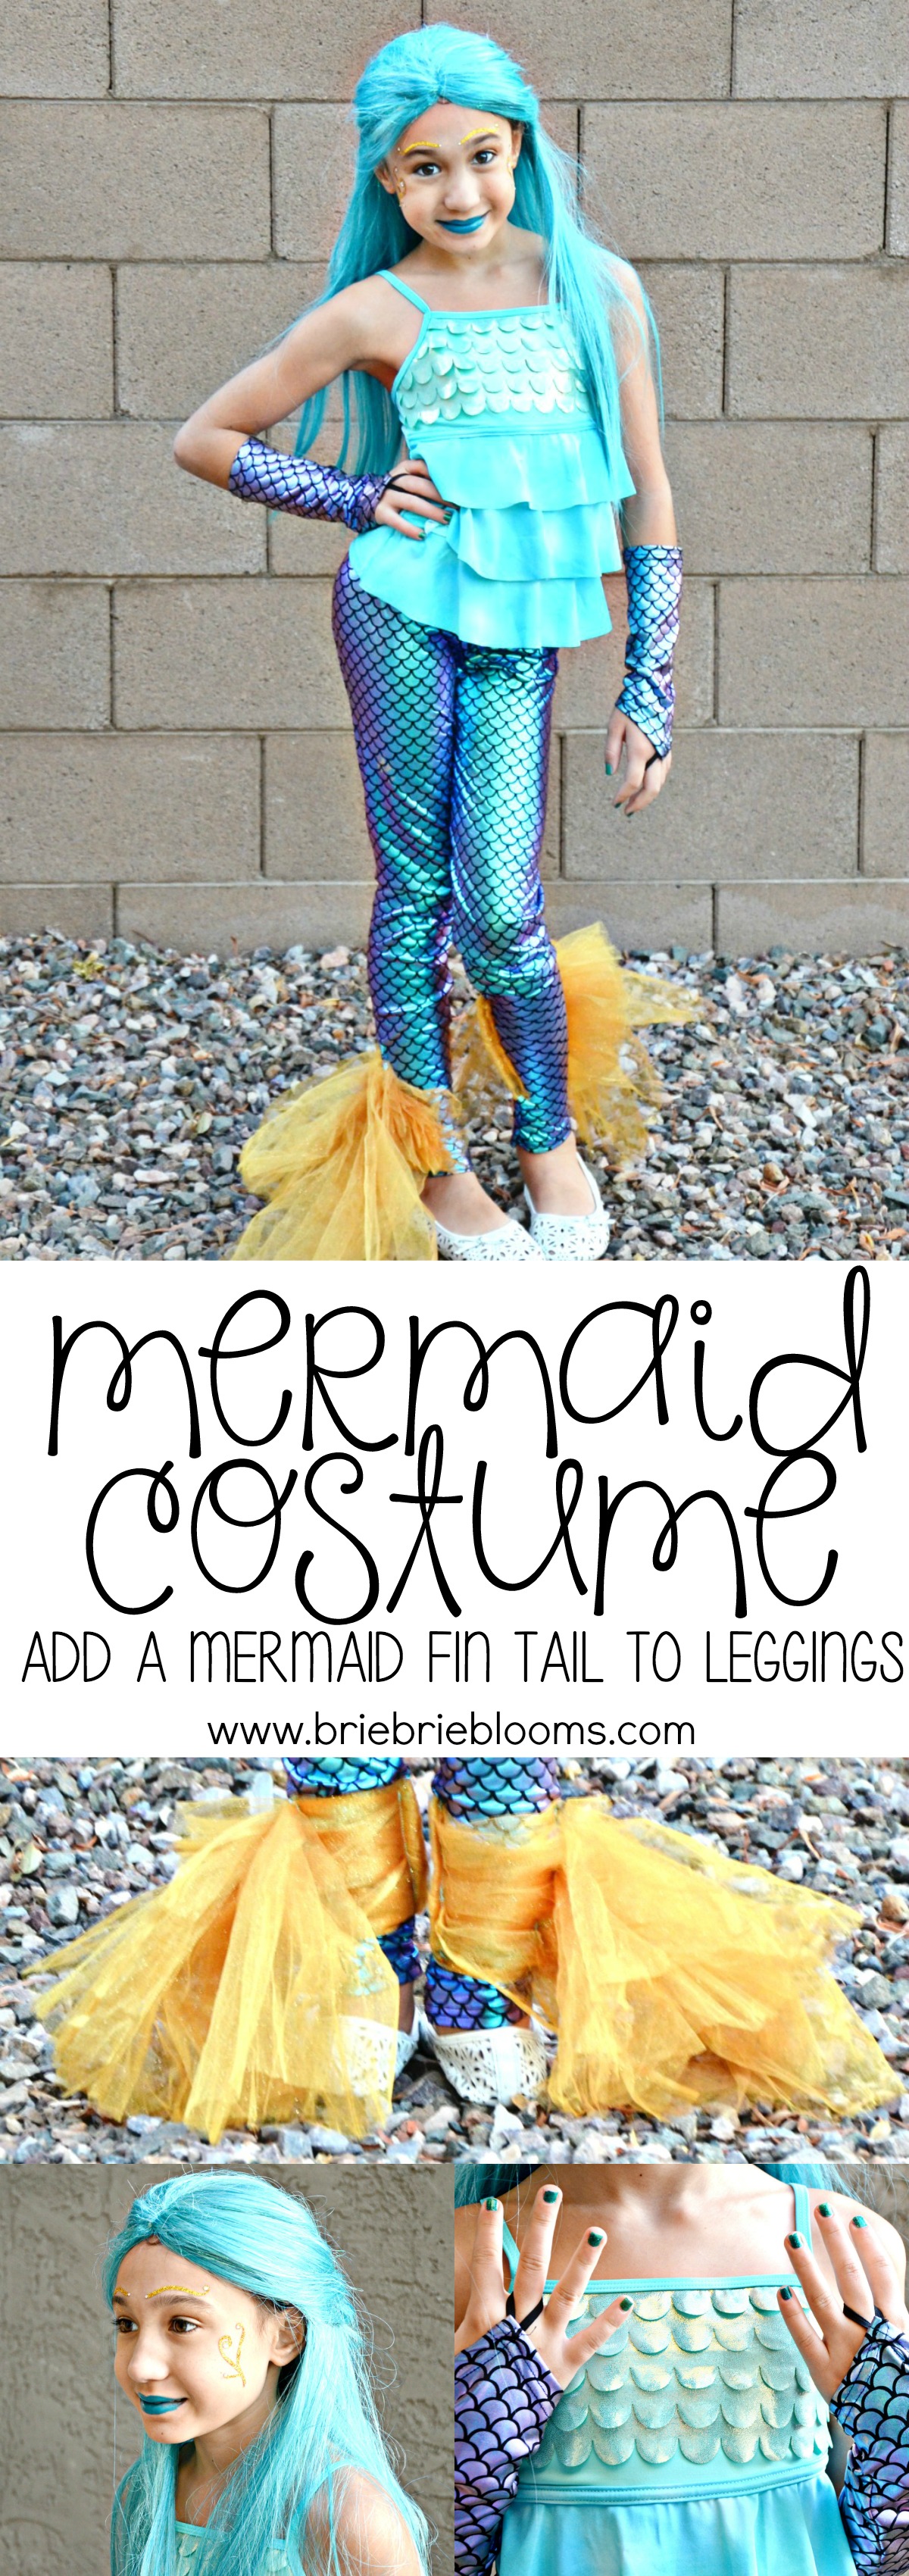 How to Make Your Own Leggings from an Existing Pair — The Mermaid's Den